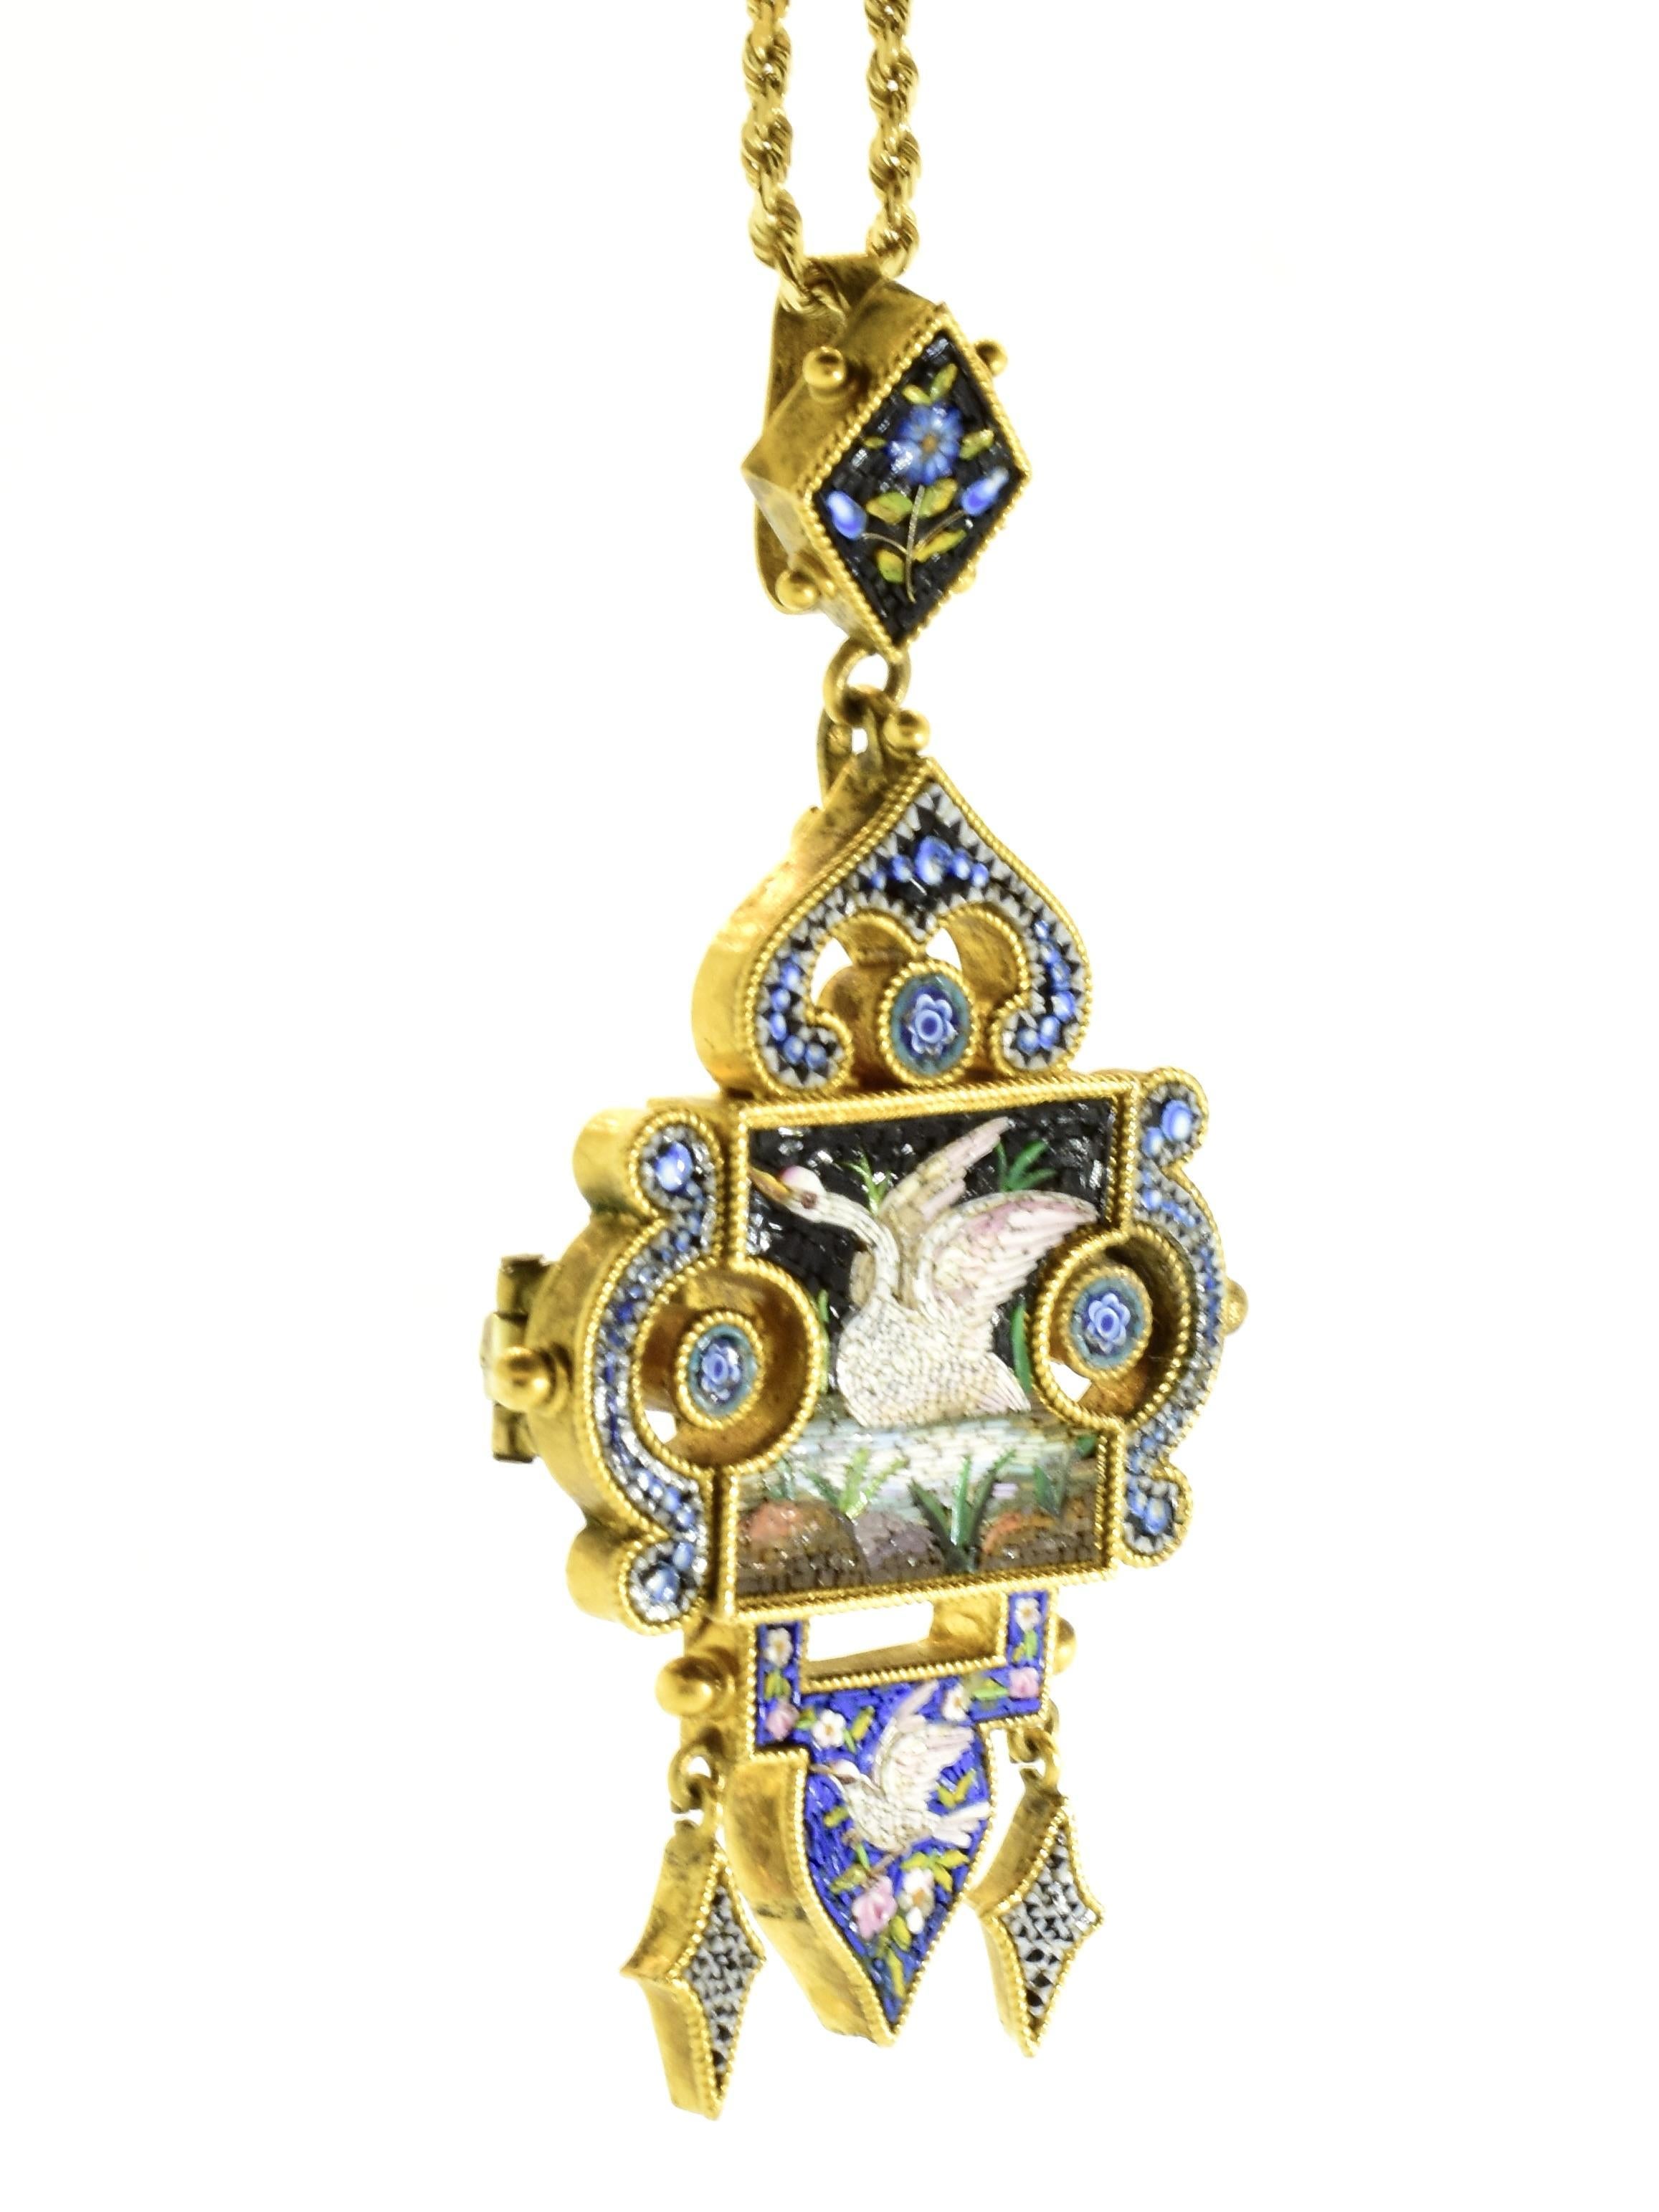 Antique Micro Mosaic 18K Pendant and Brooch, c. 1880 1